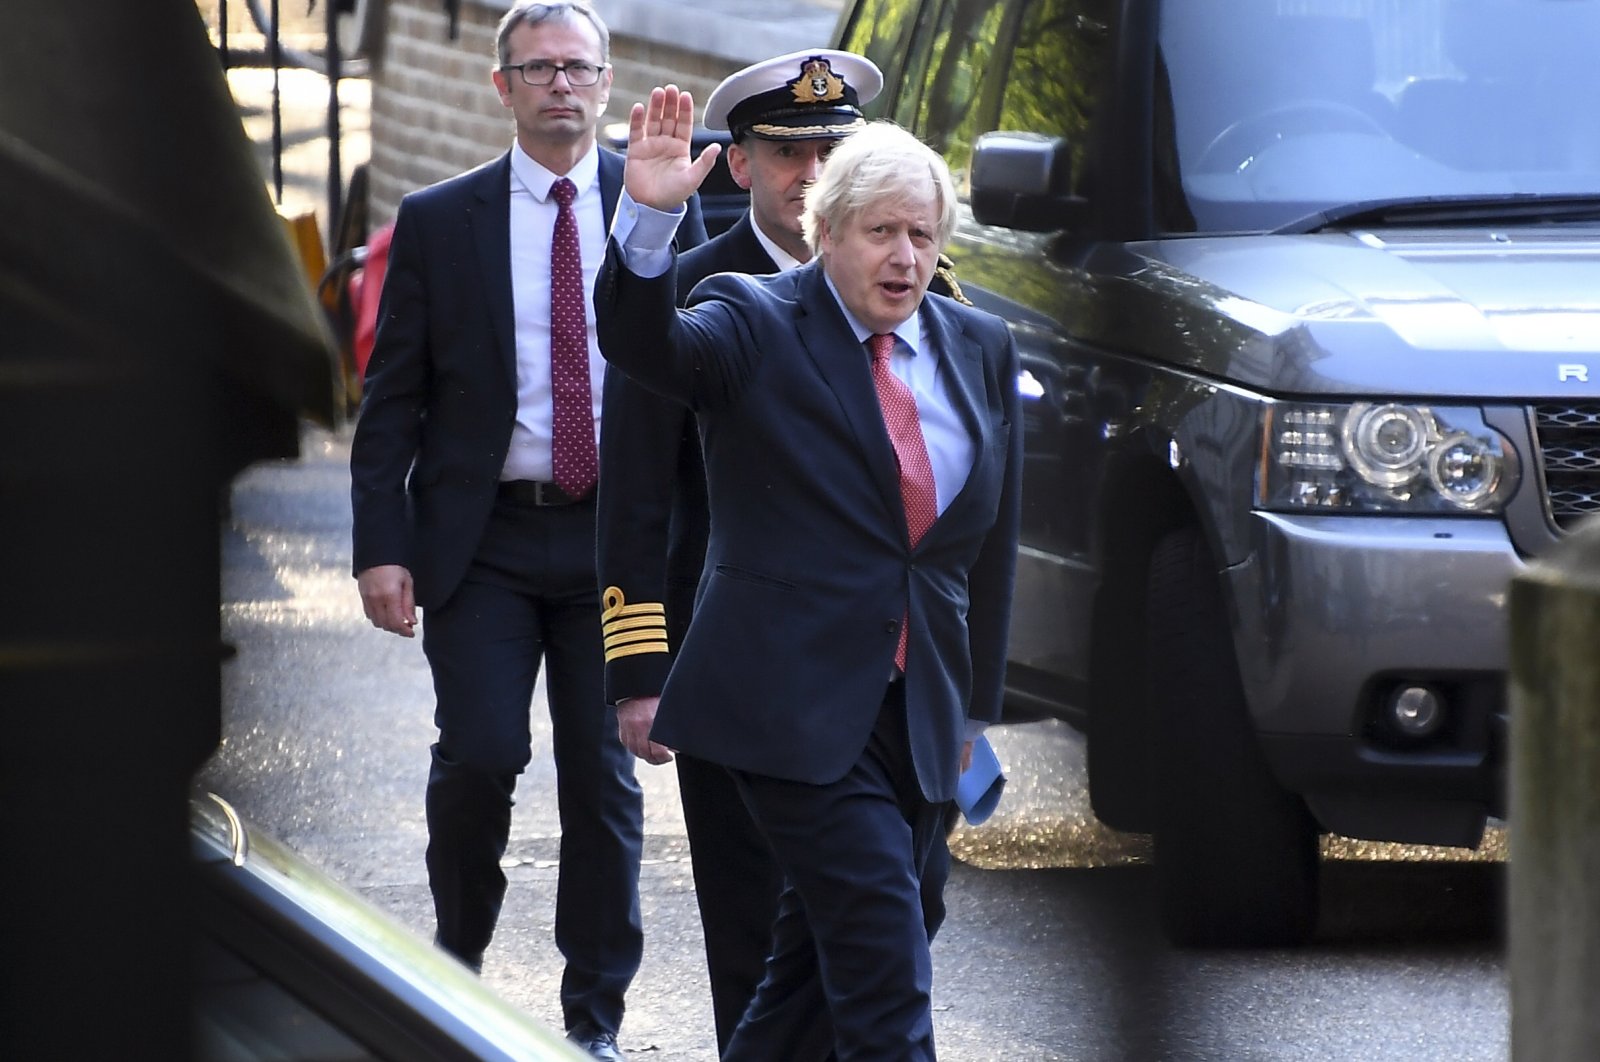 Britain's Prime Minister Boris Johnson walks into the rear entrance of Downing Street, in London, May 7, 2020 (AP Photo)